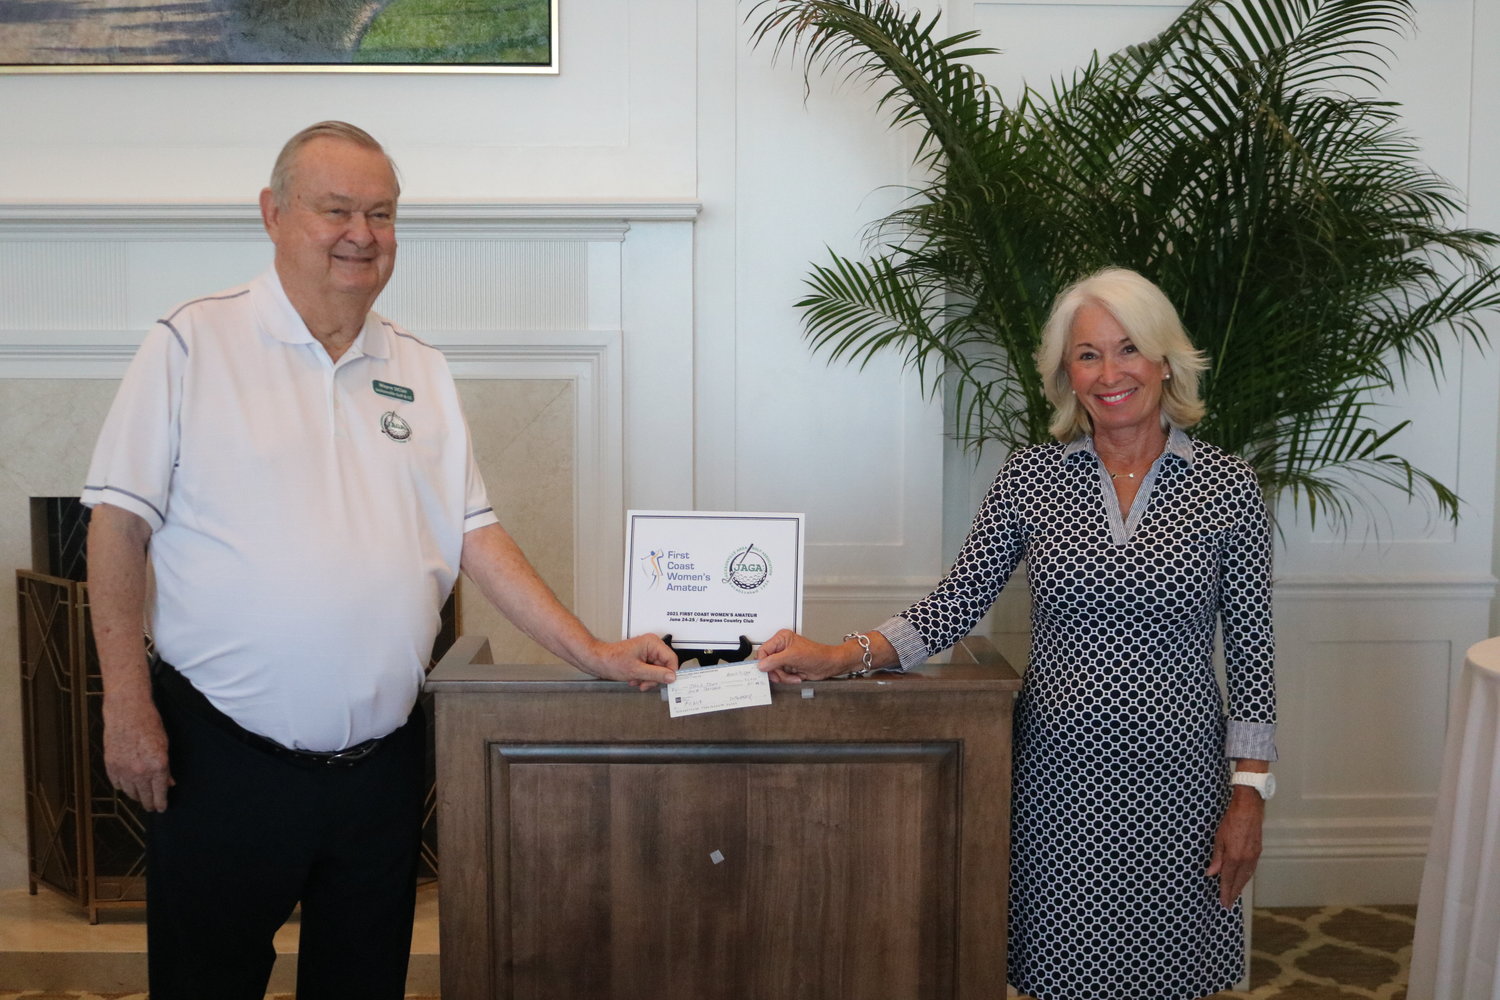 Melissa Gotfredson with the First Coast Women’s Amateur Championship presented a $1,000 check donation to Wayne St. Clair and the JAGA scholarship committee.